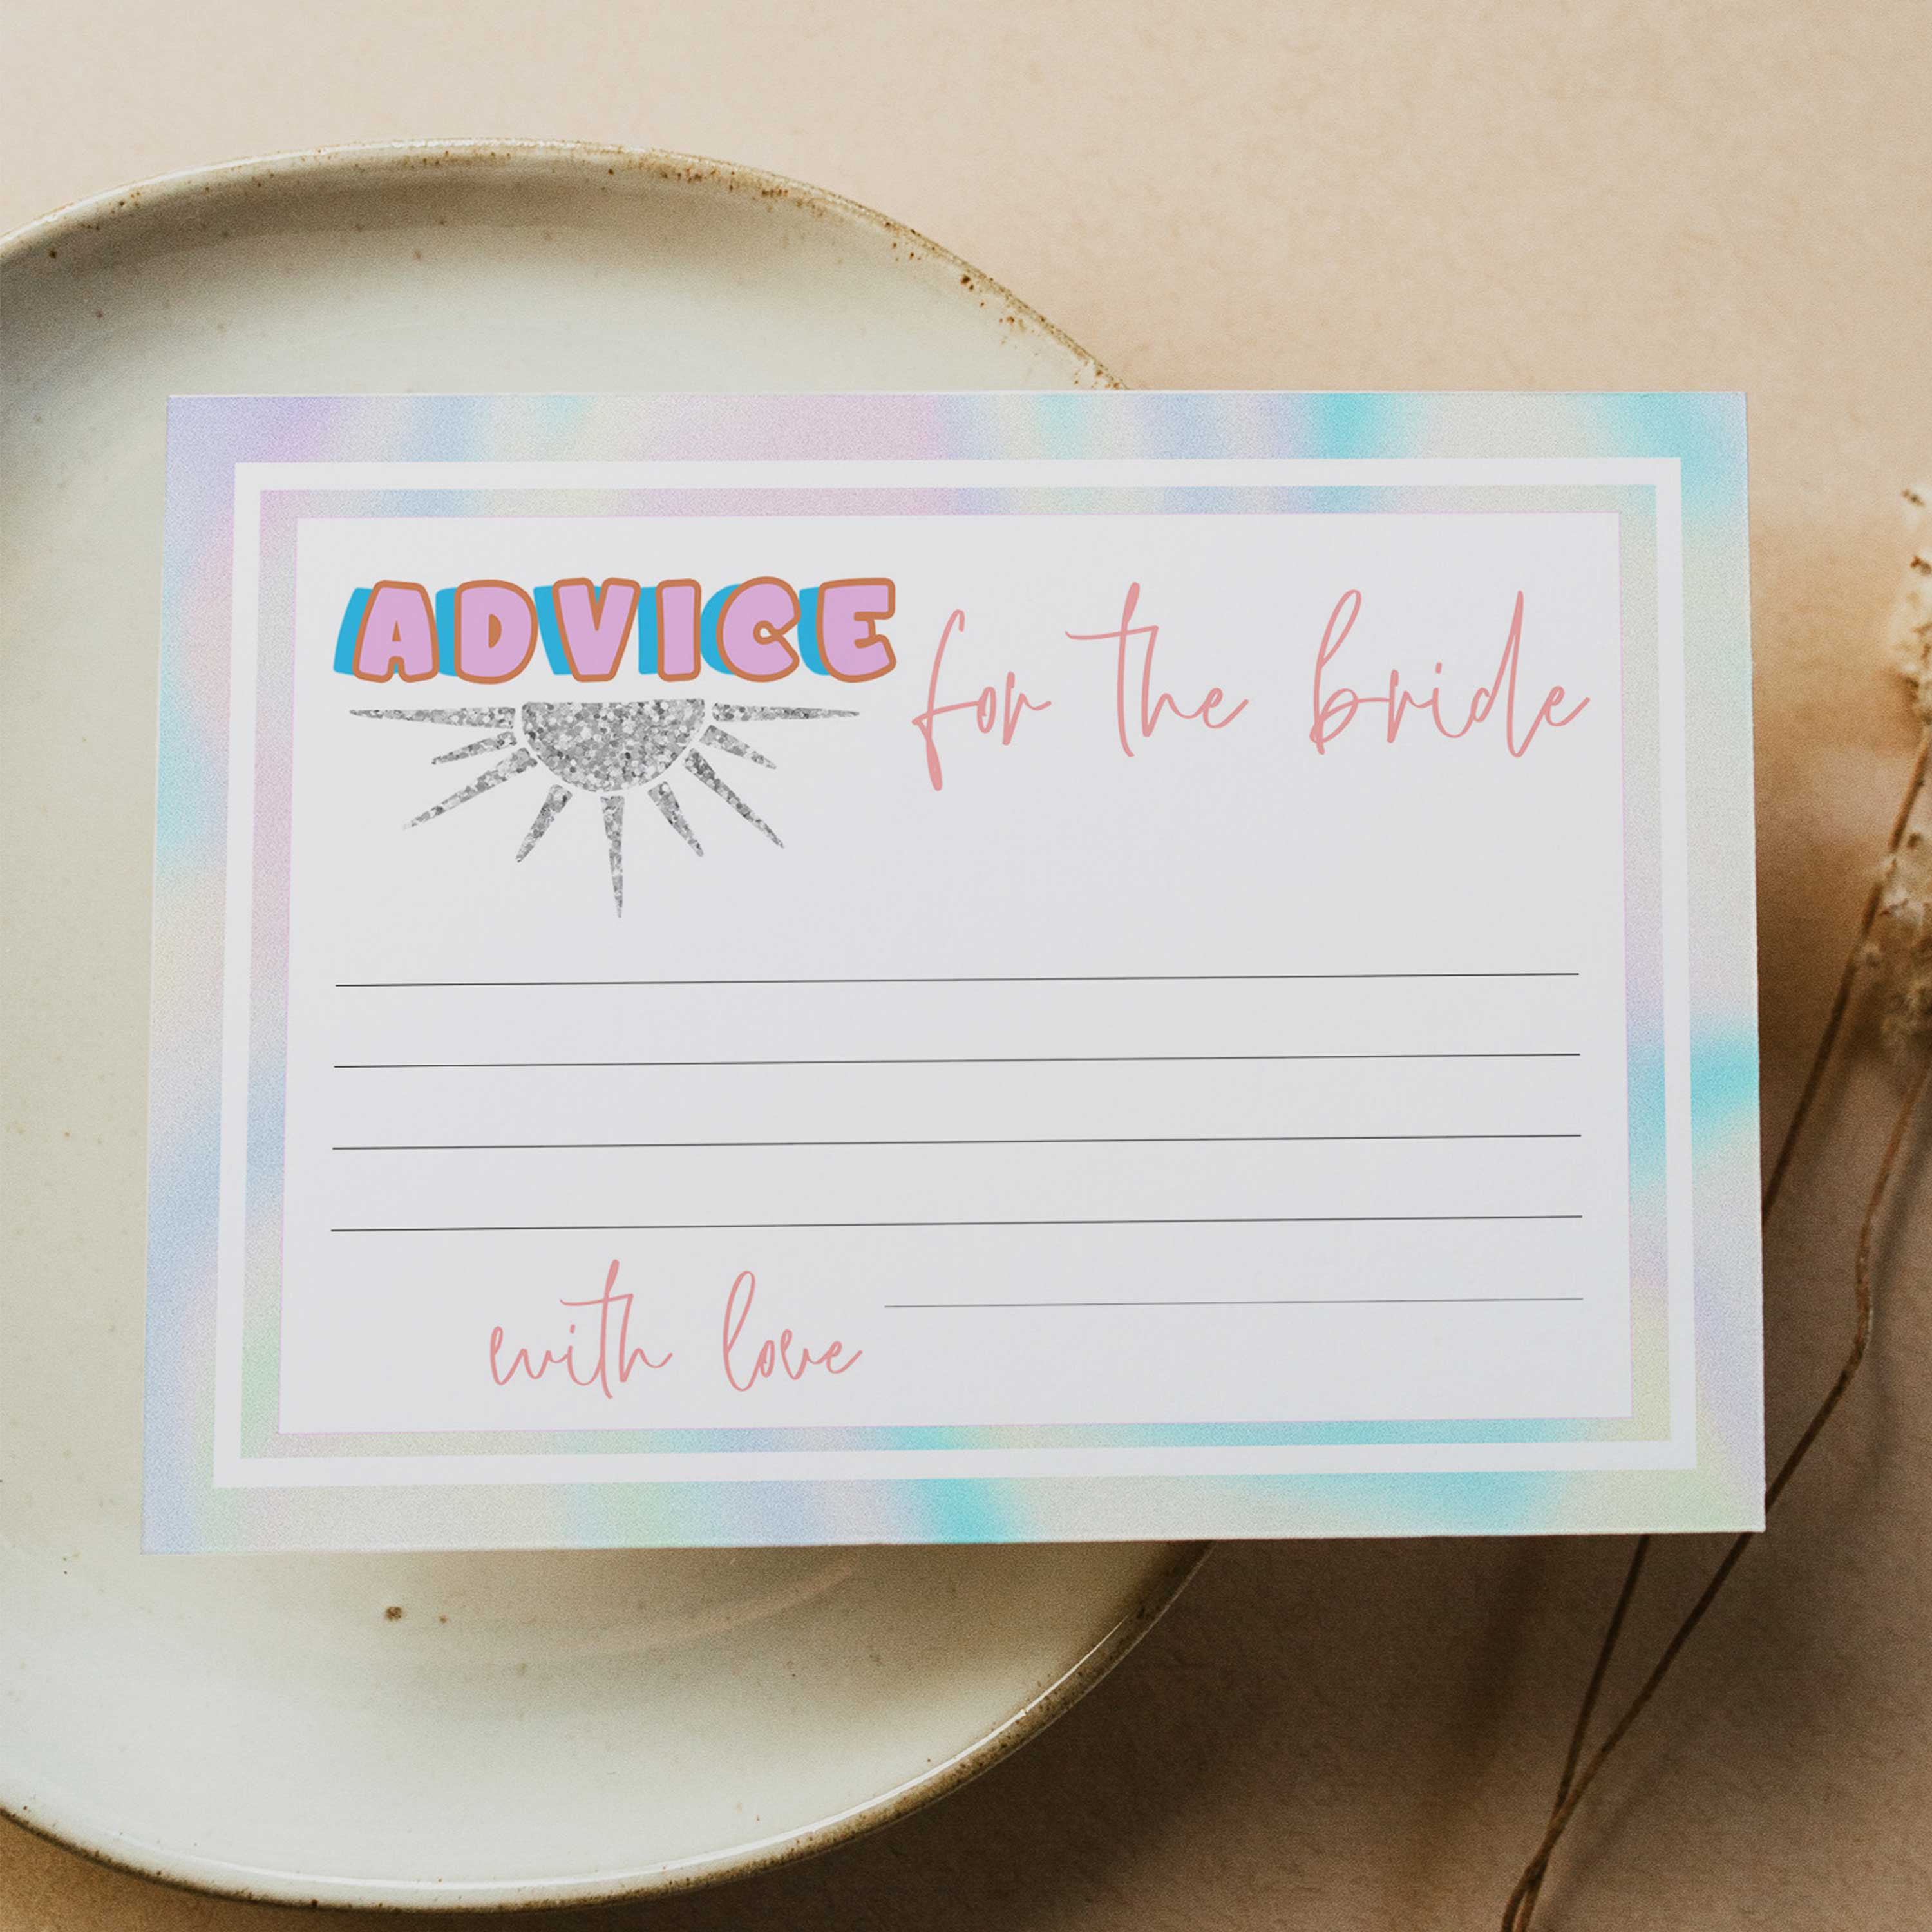 advice for the bride keepsake, Space cowgirl bridal shower games, printable bridal shower games, bridal games, bridal shower games, disco bridal games